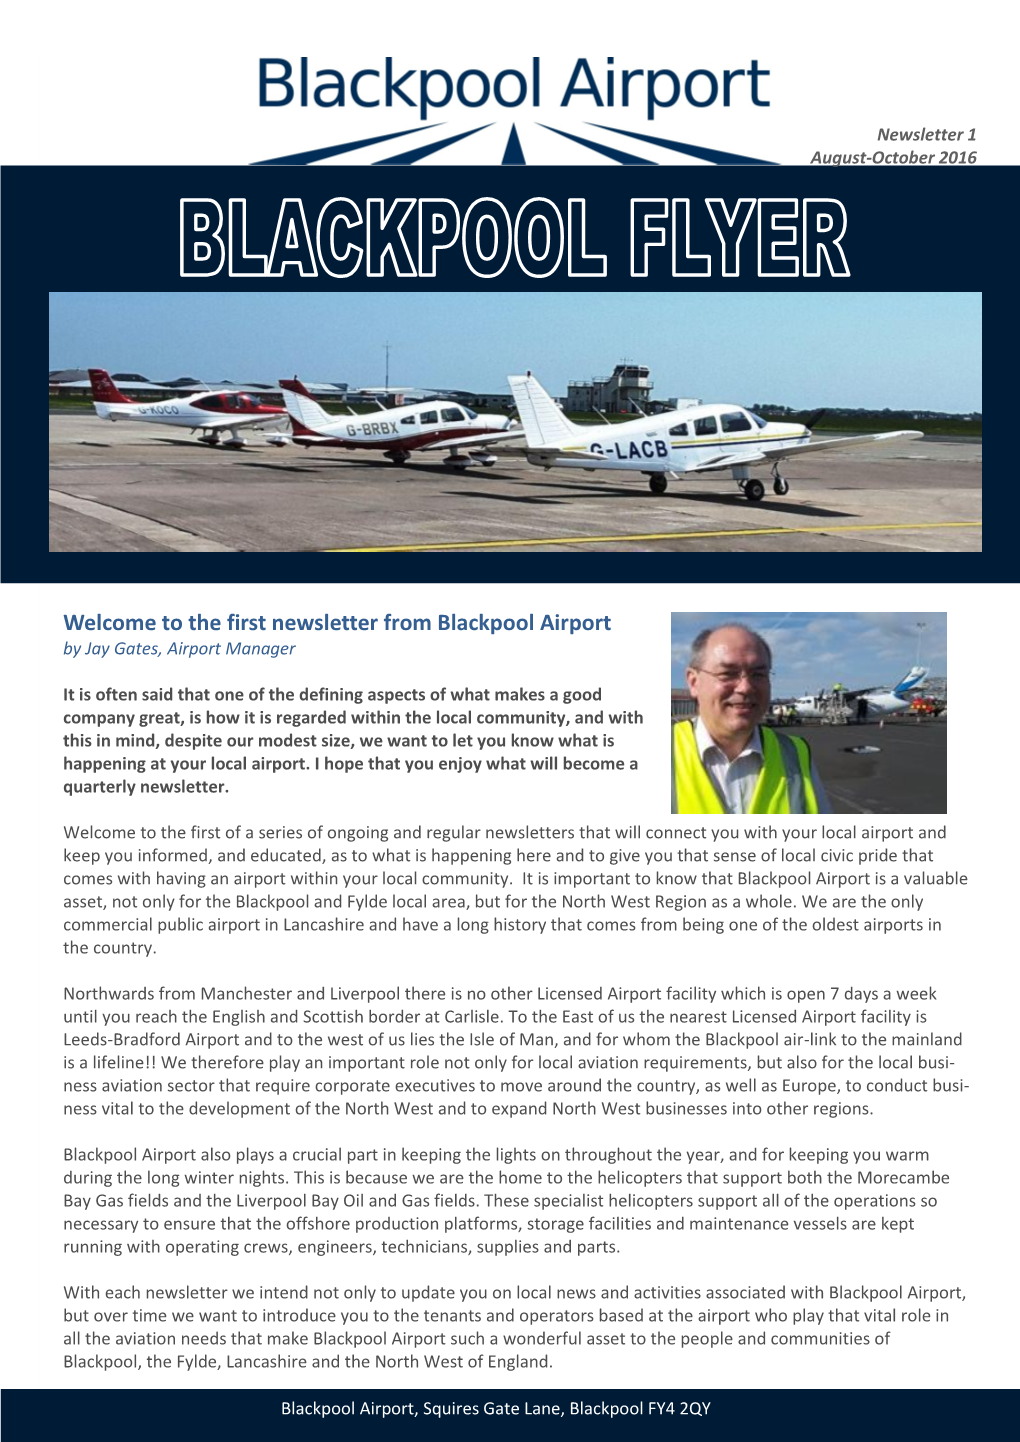 Welcome to the First Newsletter from Blackpool Airport by Jay Gates, Airport Manager